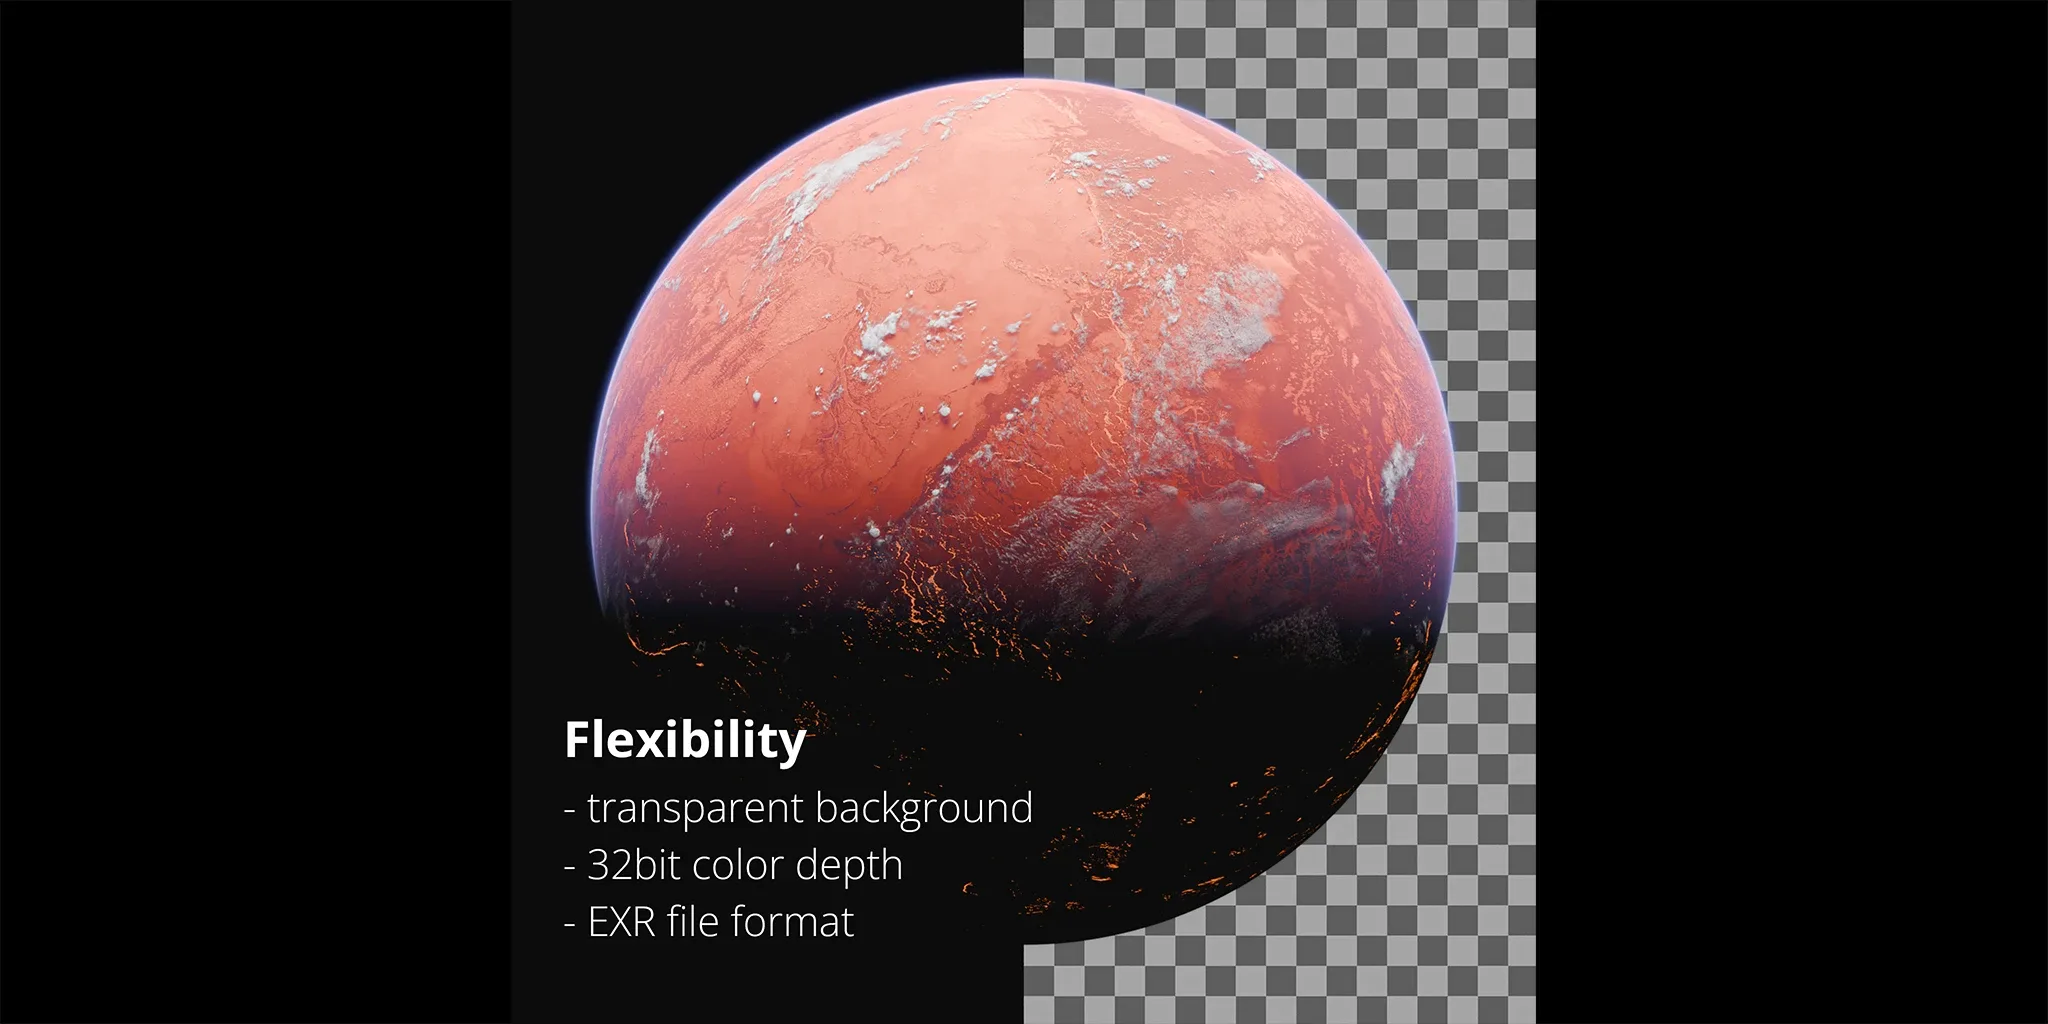 Planets - 8K Image Pack